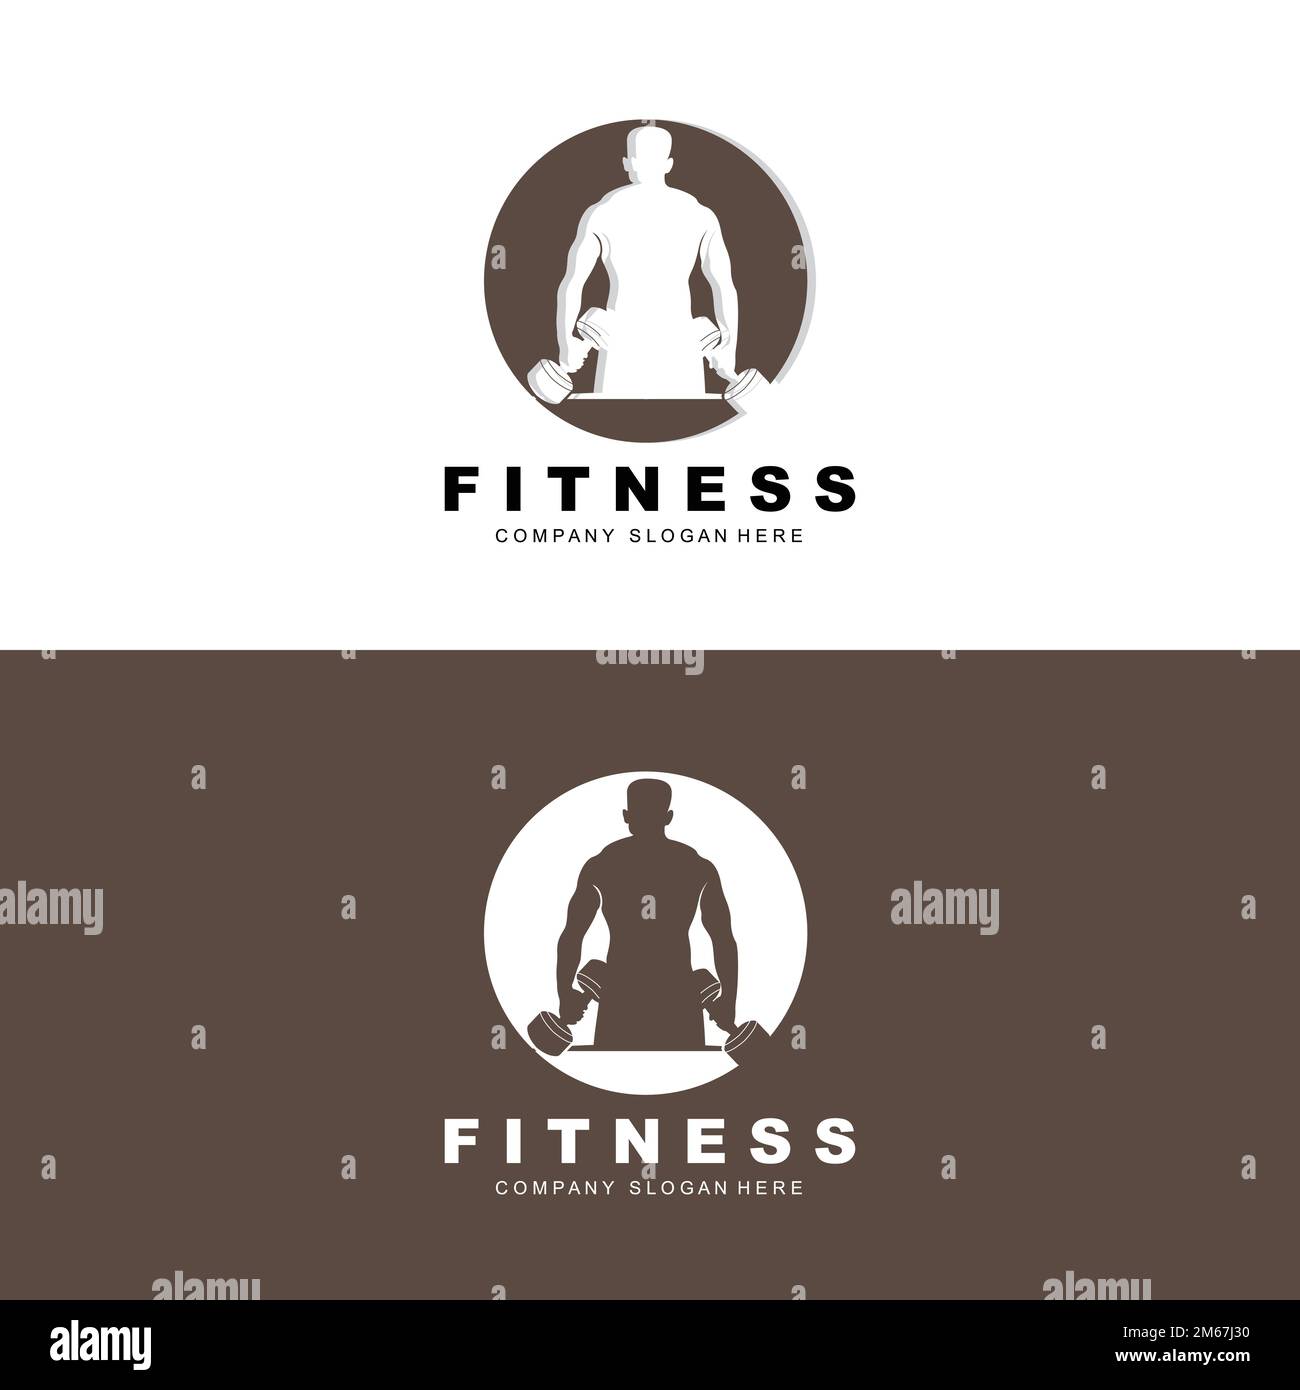 Gym Logo, Fitness Logo Vector, Design Suitable For Fitness, Sports Equipment, Body Health, Body Supplement Product Brands Stock Vector